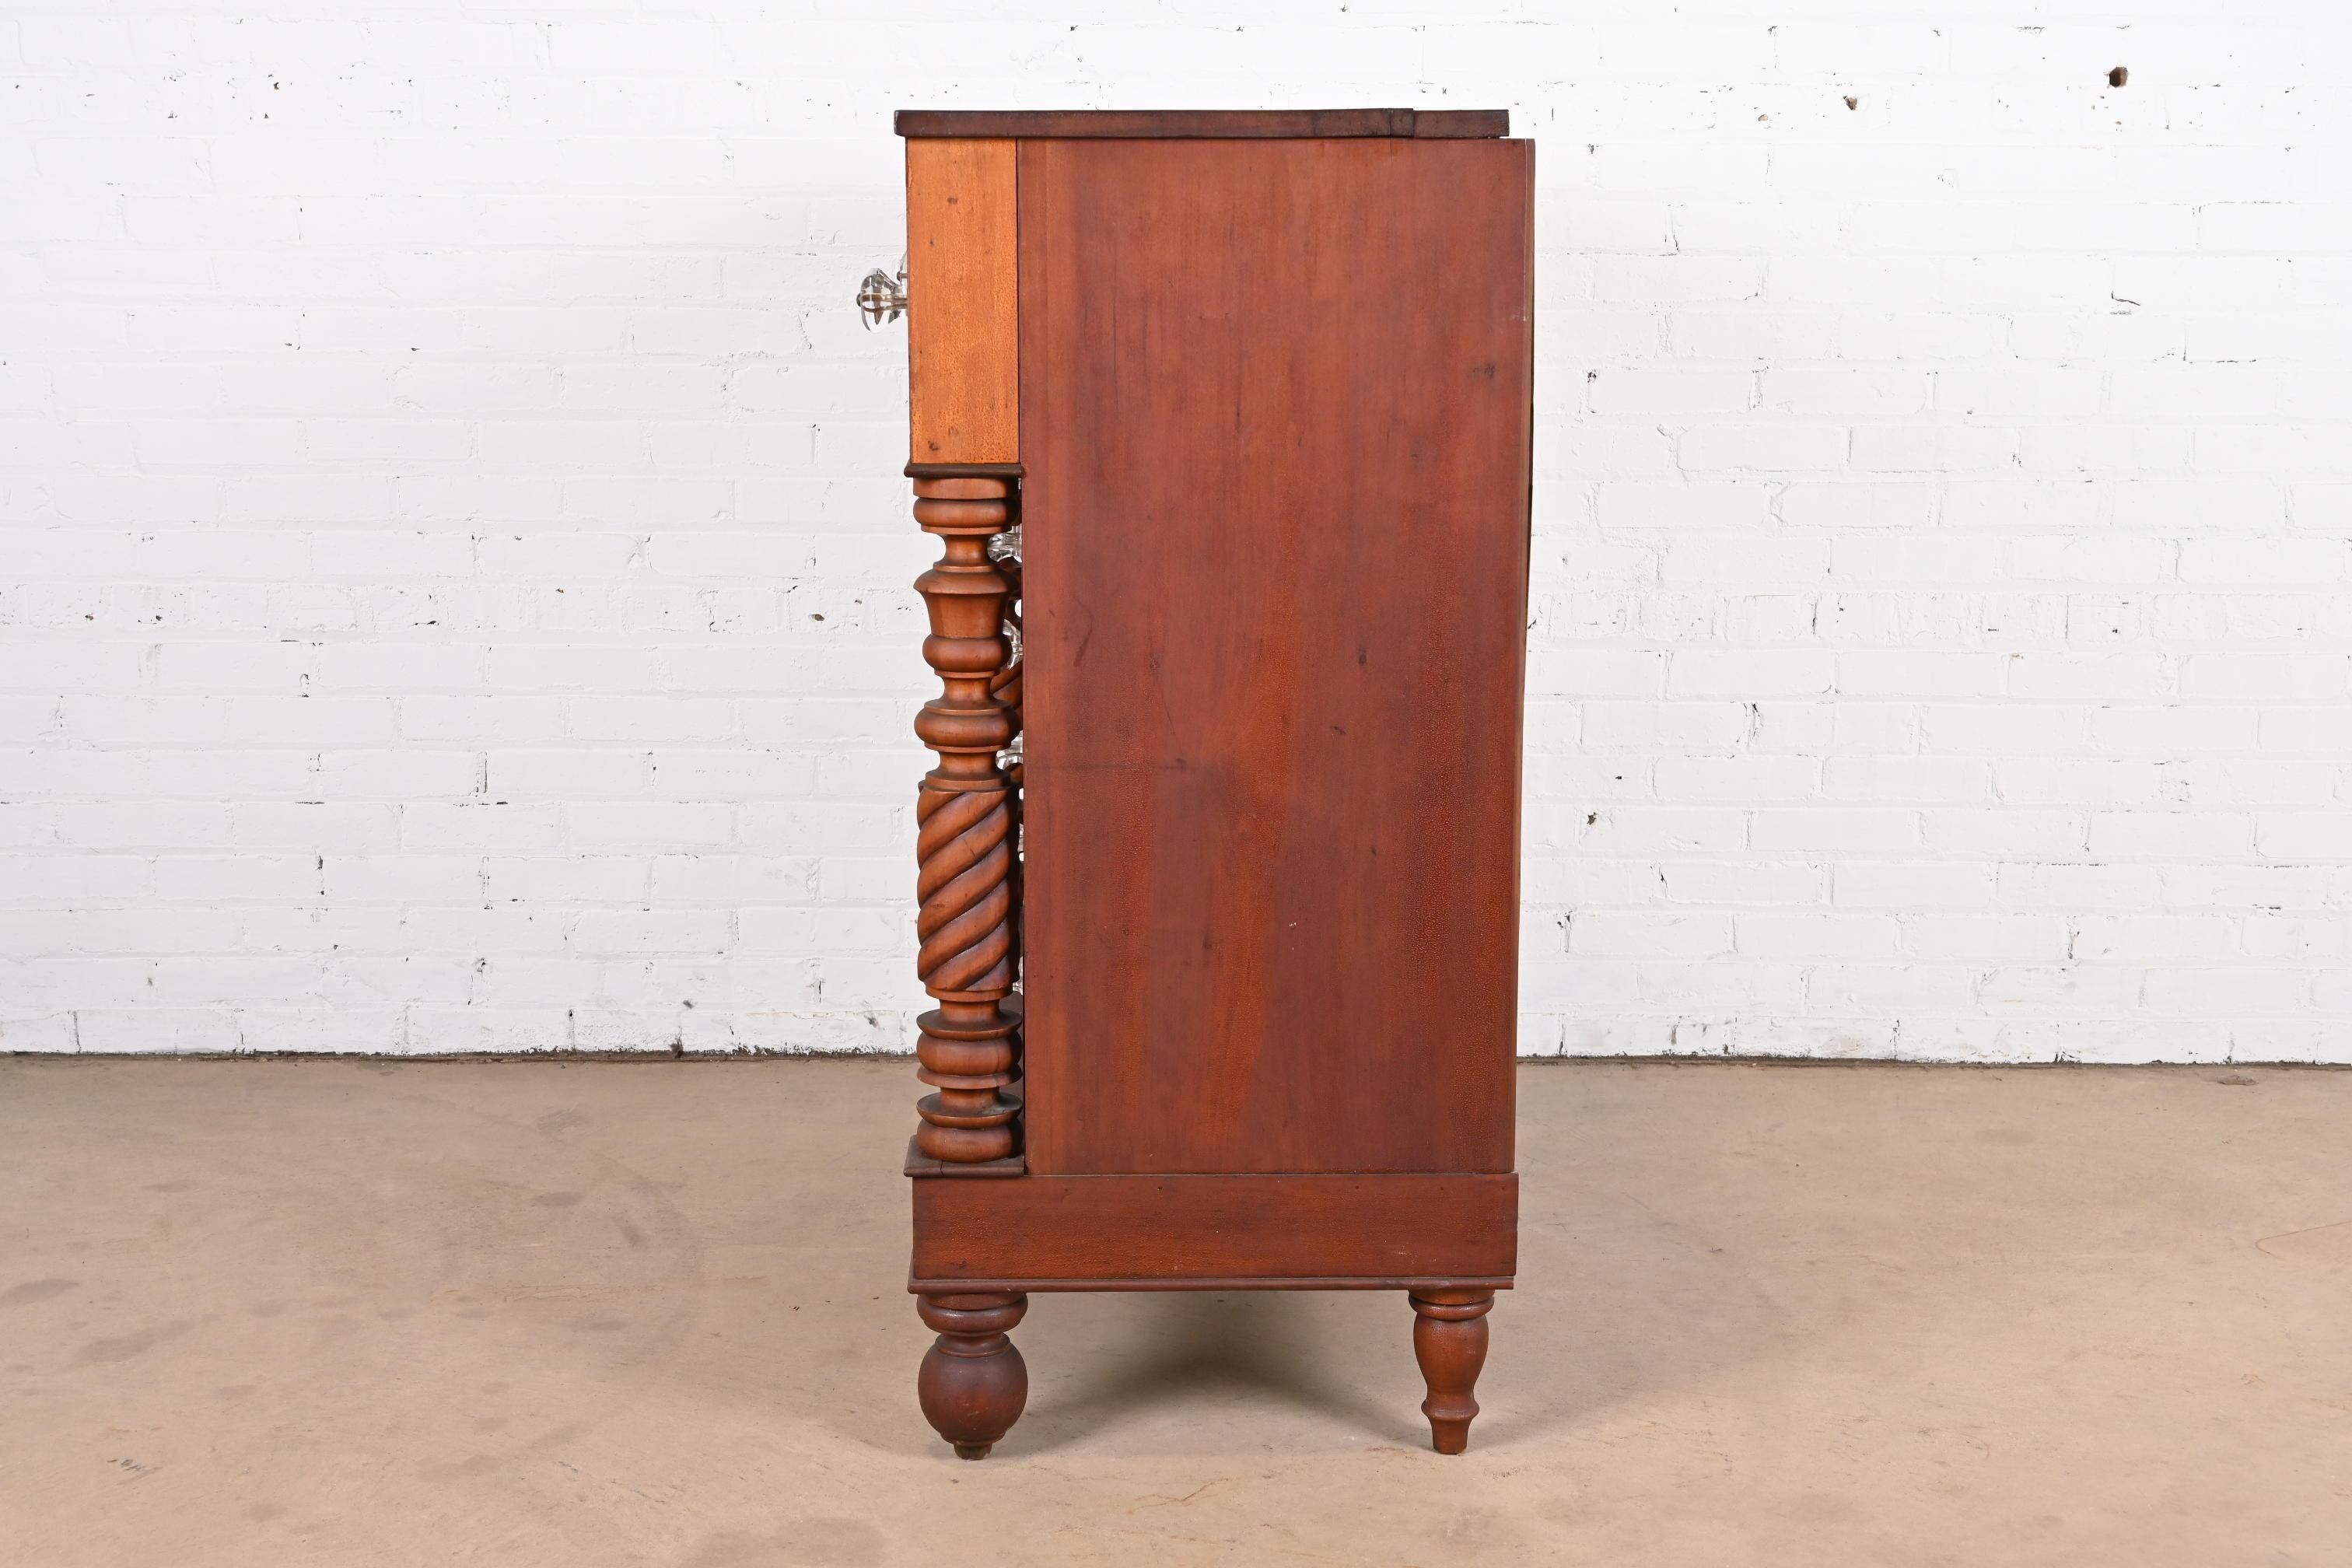 Antique American Empire Burled Mahogany Chest of Drawers, Circa 1820s For Sale 8